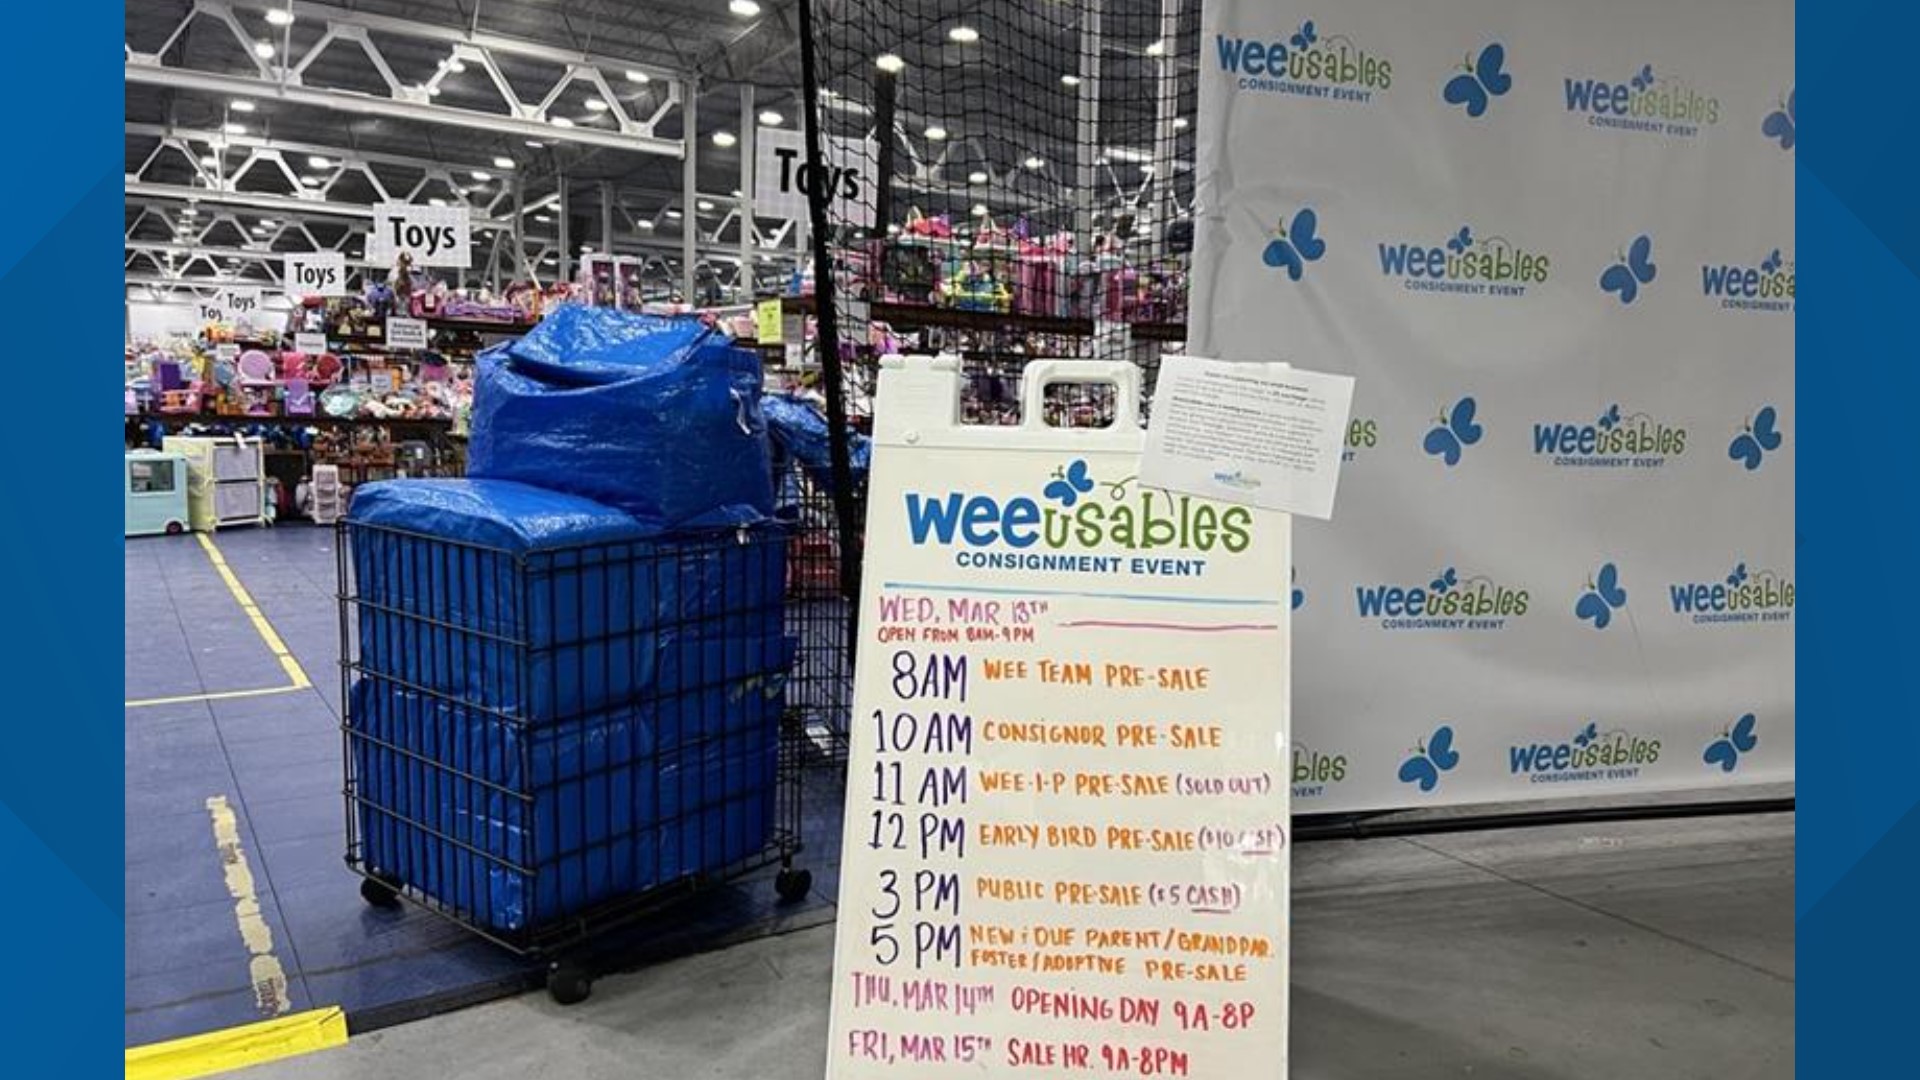 WeeUsables Pop Up Consignment is back at Spooky Nook Sports in Manheim for their spring event.